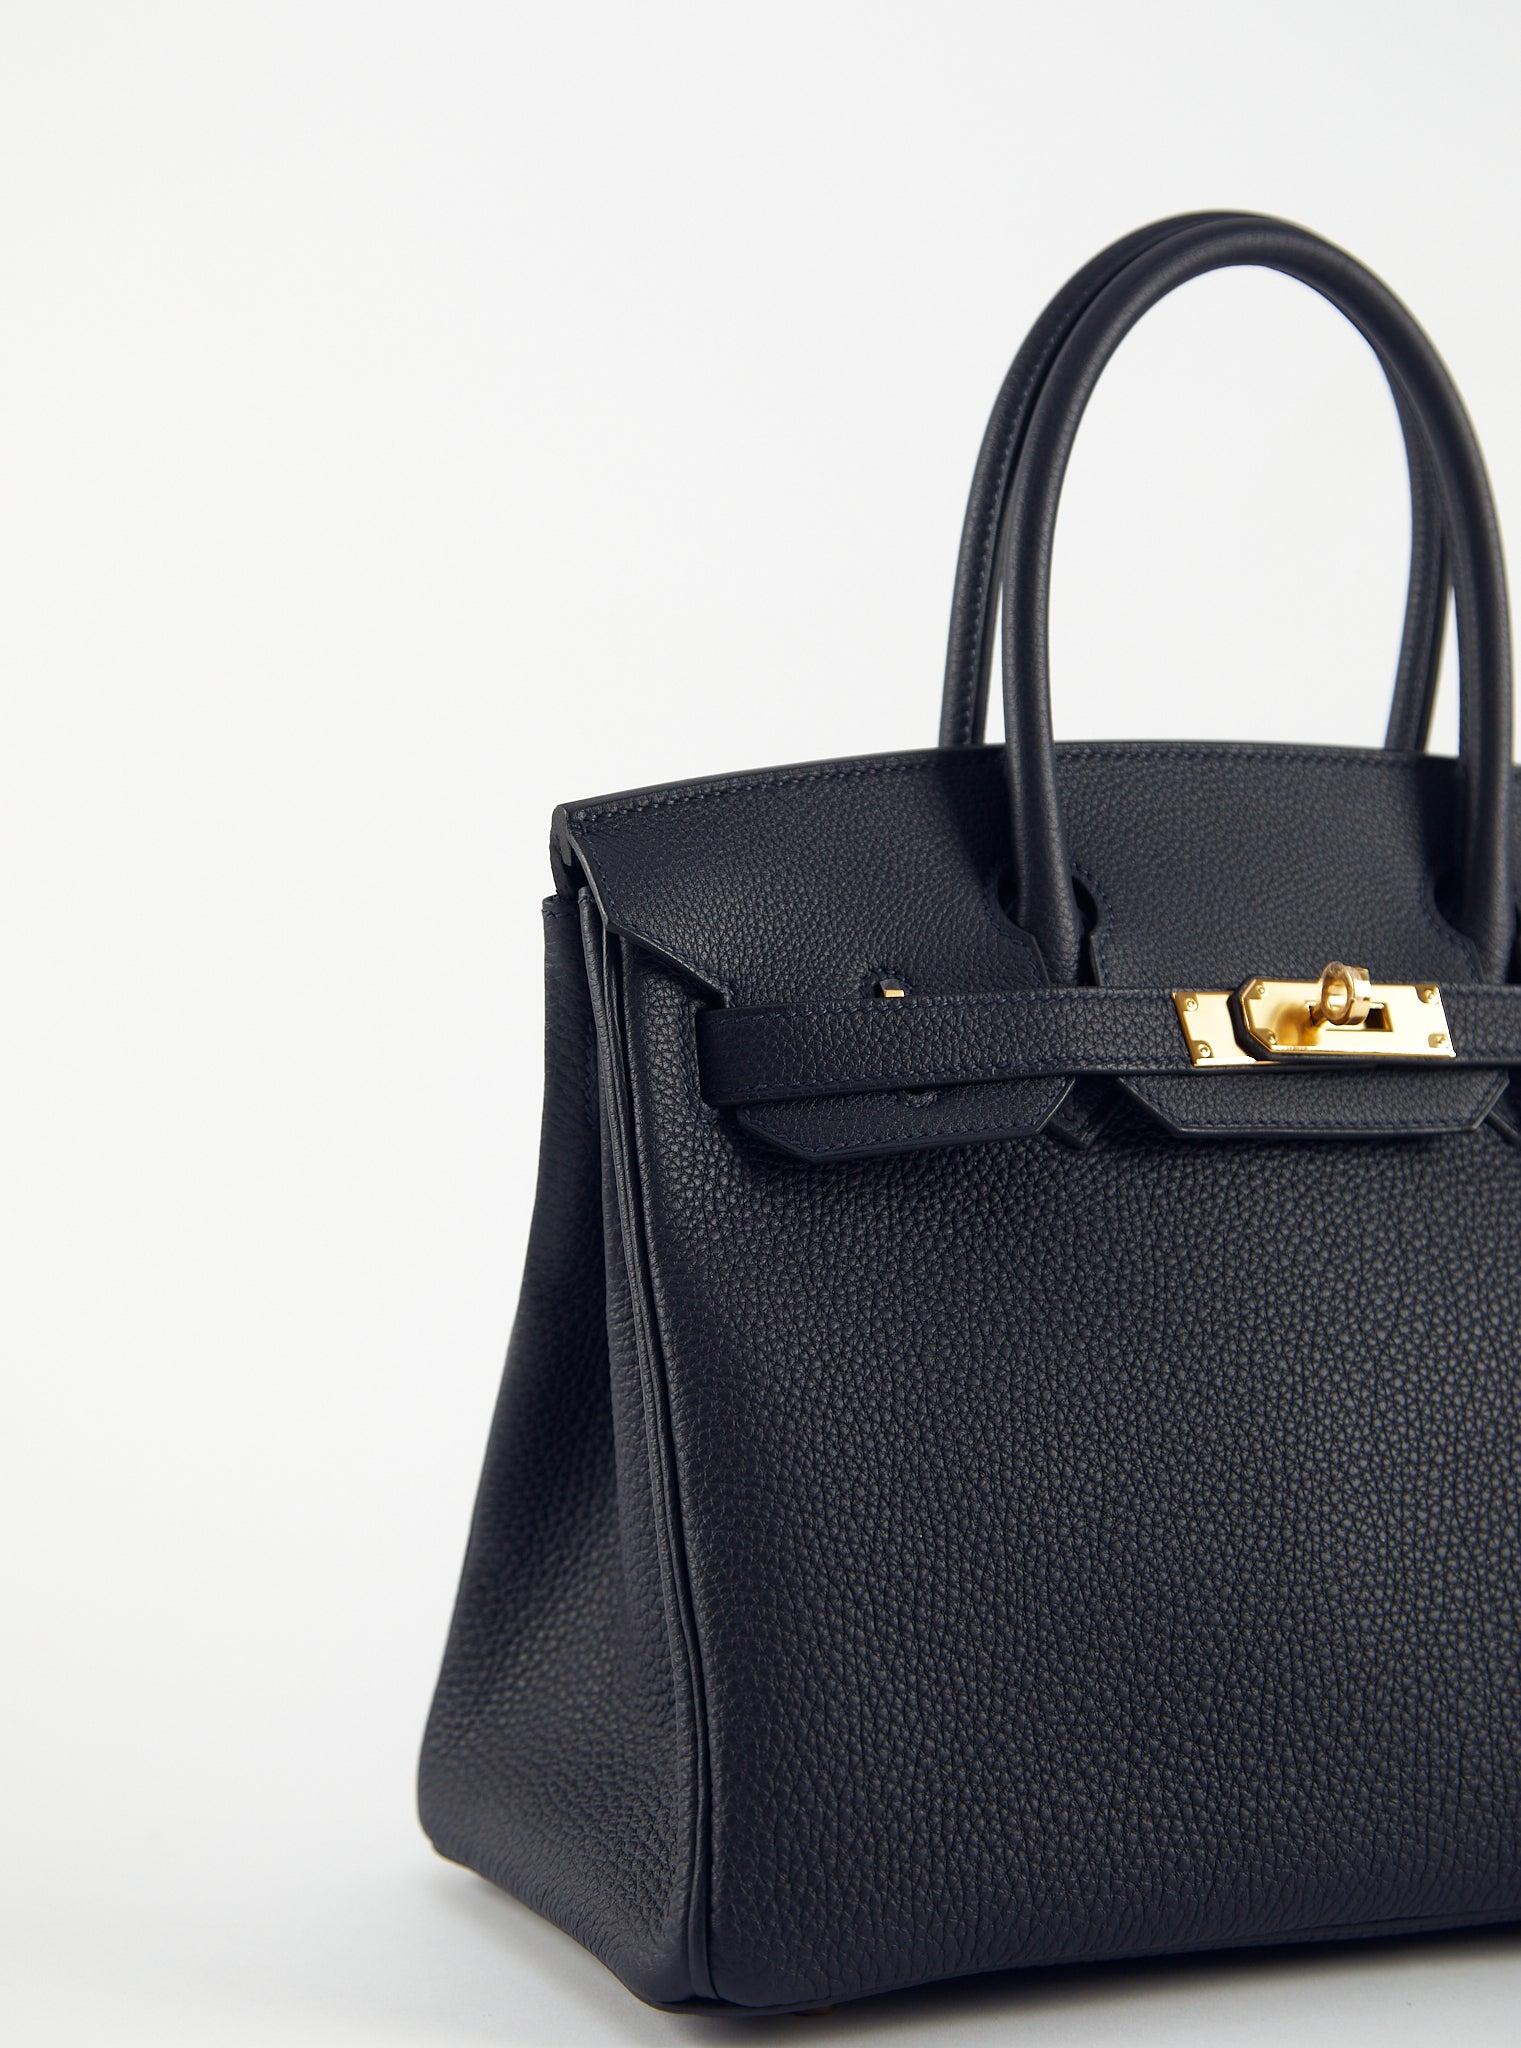 HERMÈS BIRKIN 30CM CABAN Togo Leather with Gold Hardware In Excellent Condition In London, GB